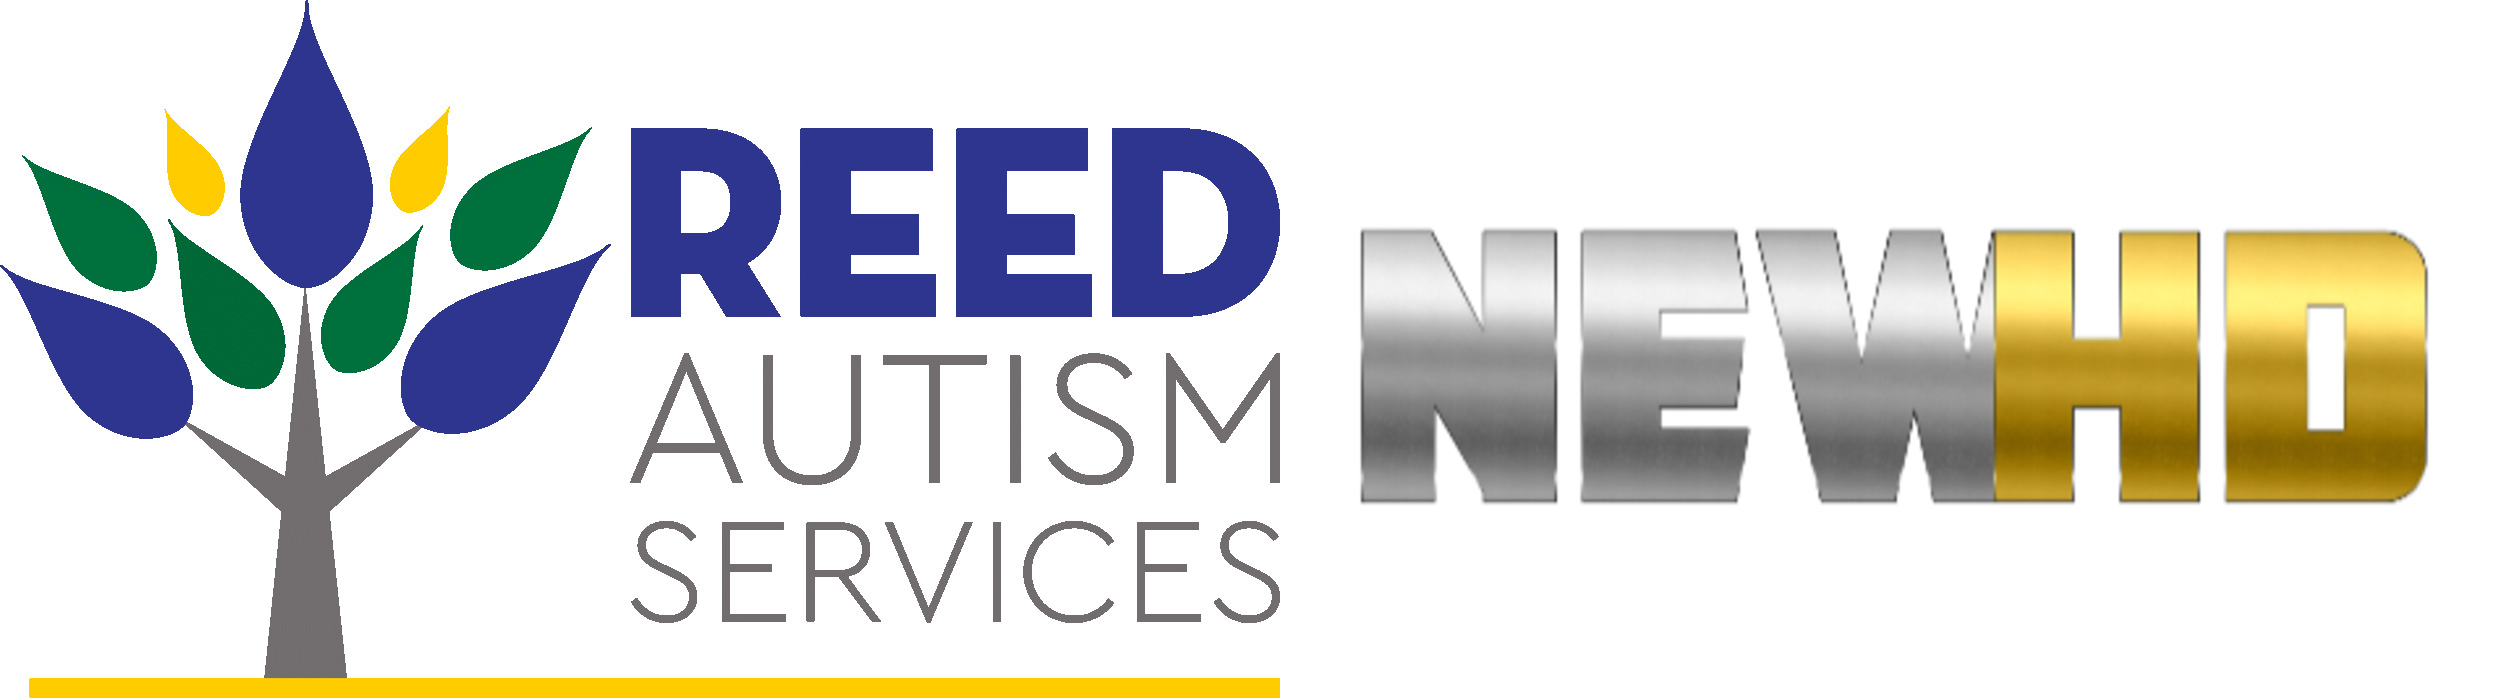 Reed Autism Services and NewHD Innovative Partnership to Empower Individuals with Autism in Broadcasting